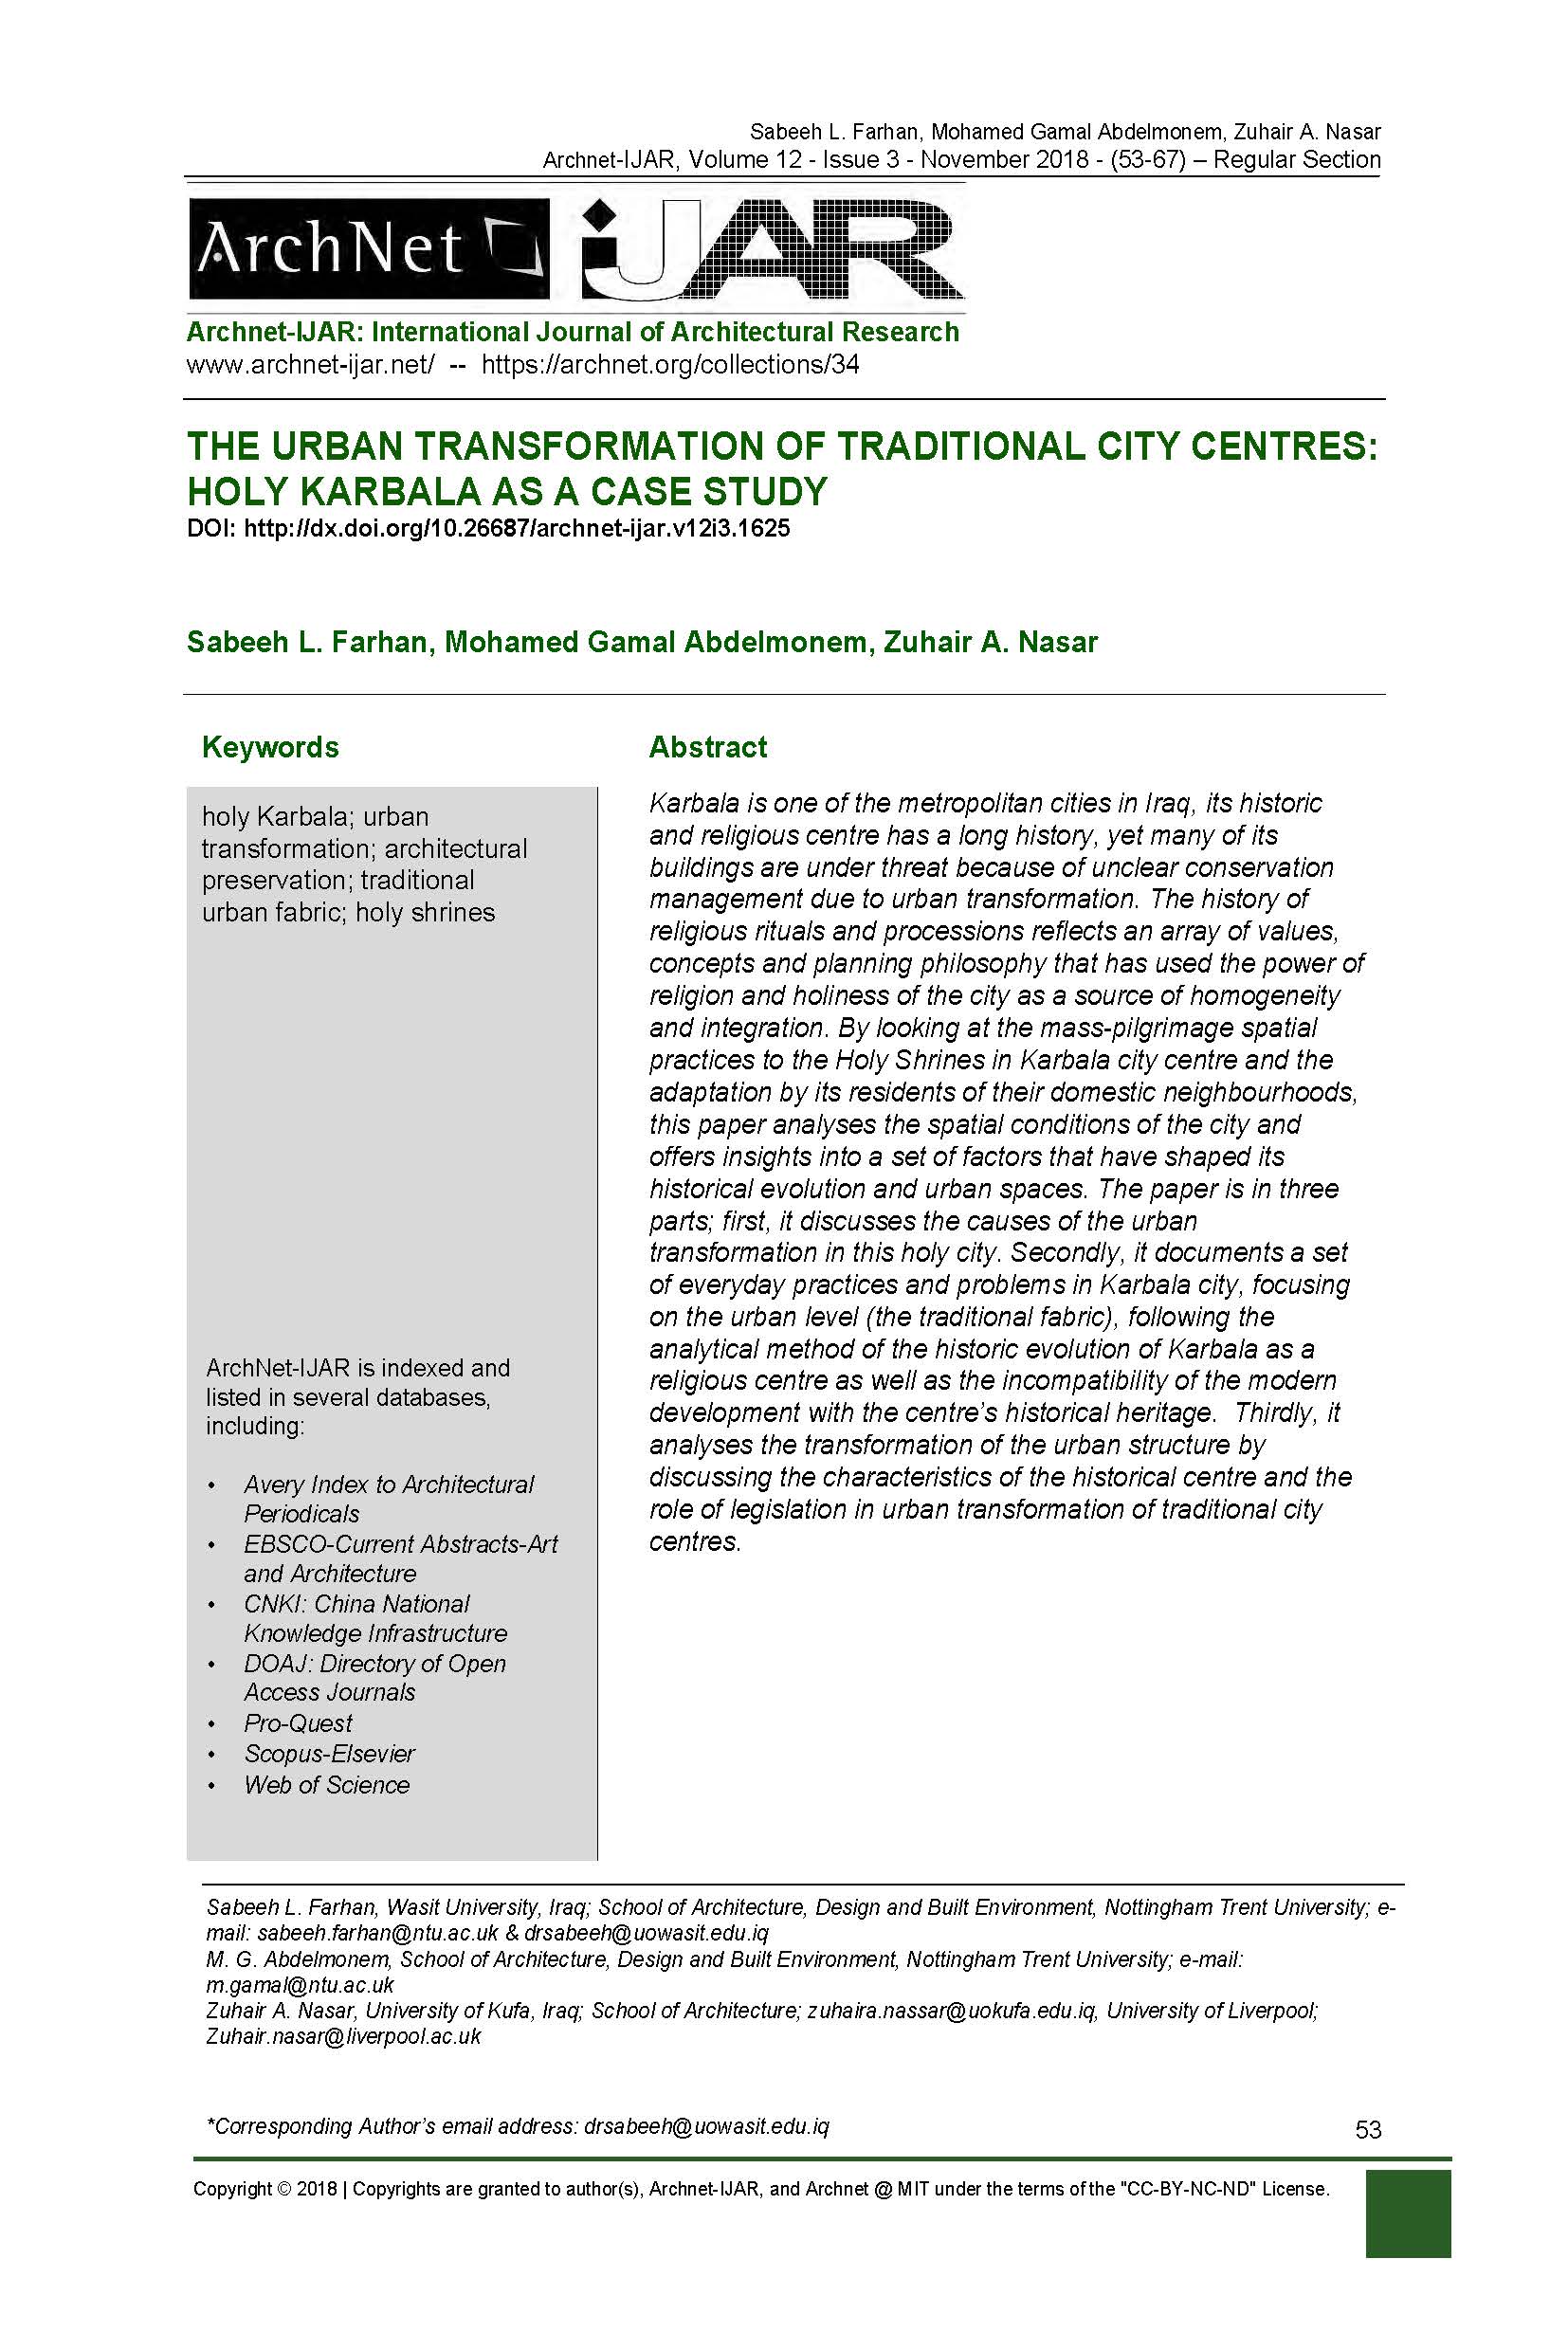 The Urban Transformation of Traditional City Centres: Holy Karbala as a Case Study